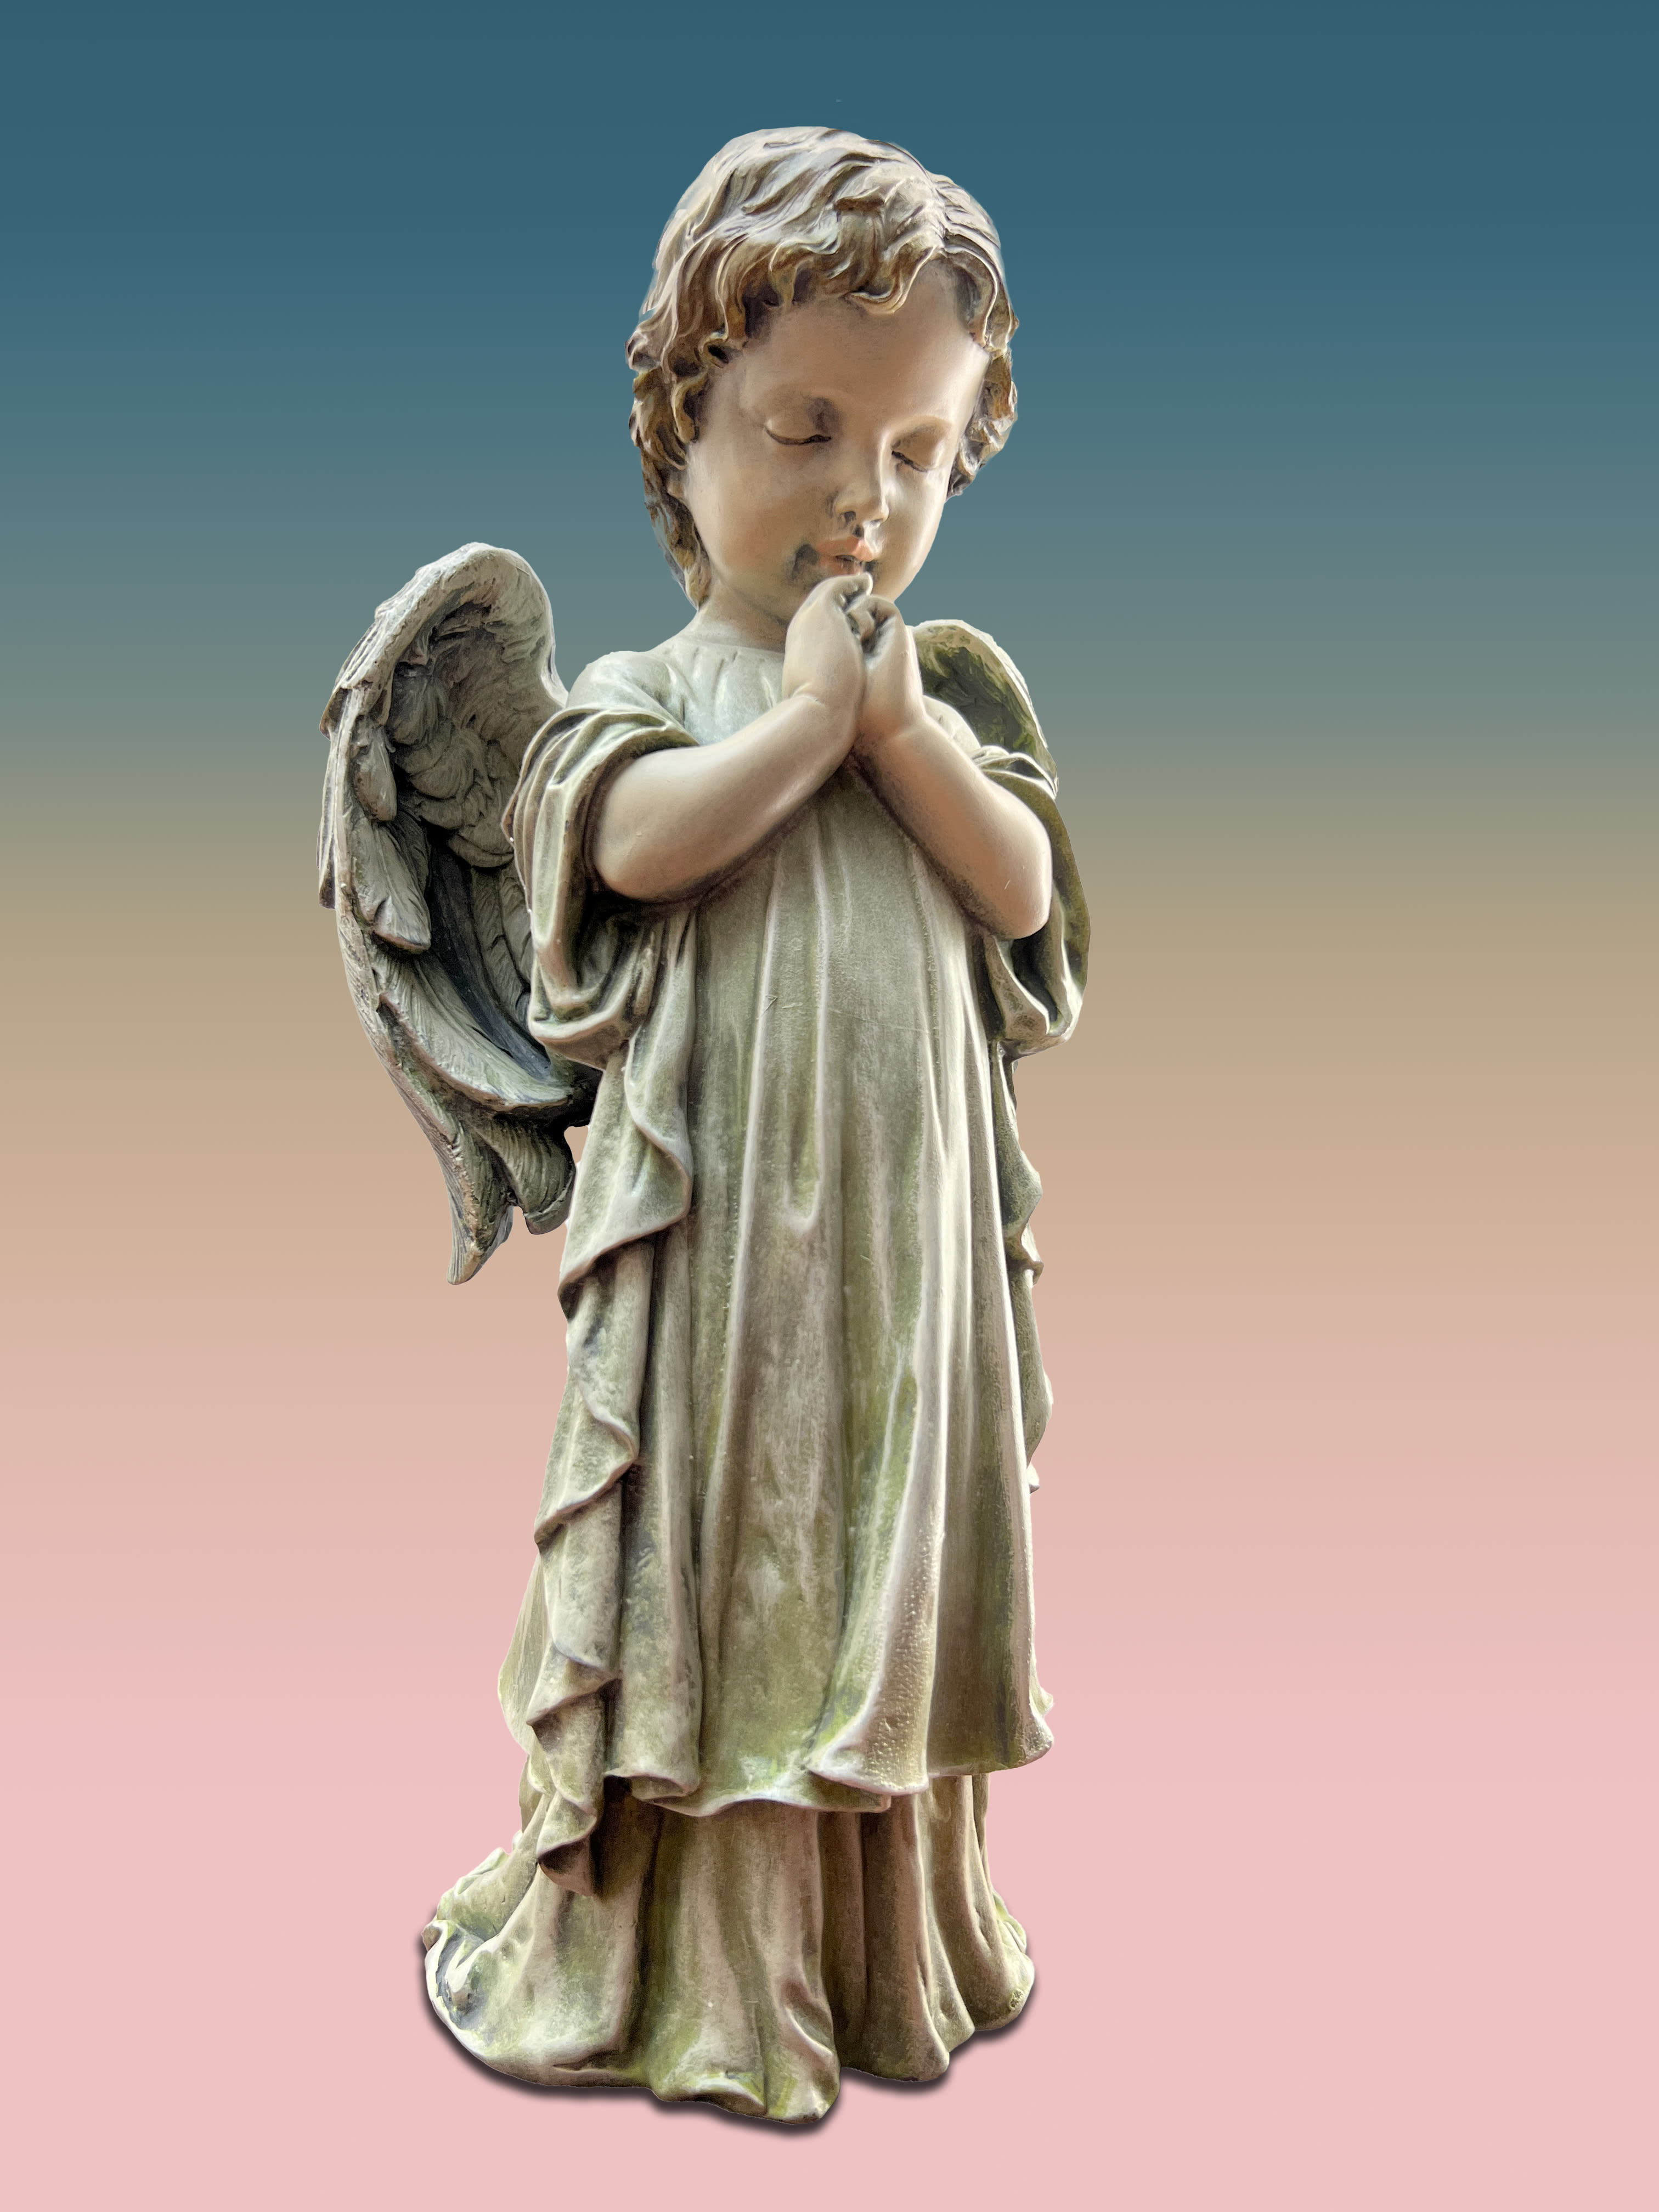 Praying Angel Boy - Resin sculpture Can be bought separately or displayed within a floral arrangement.